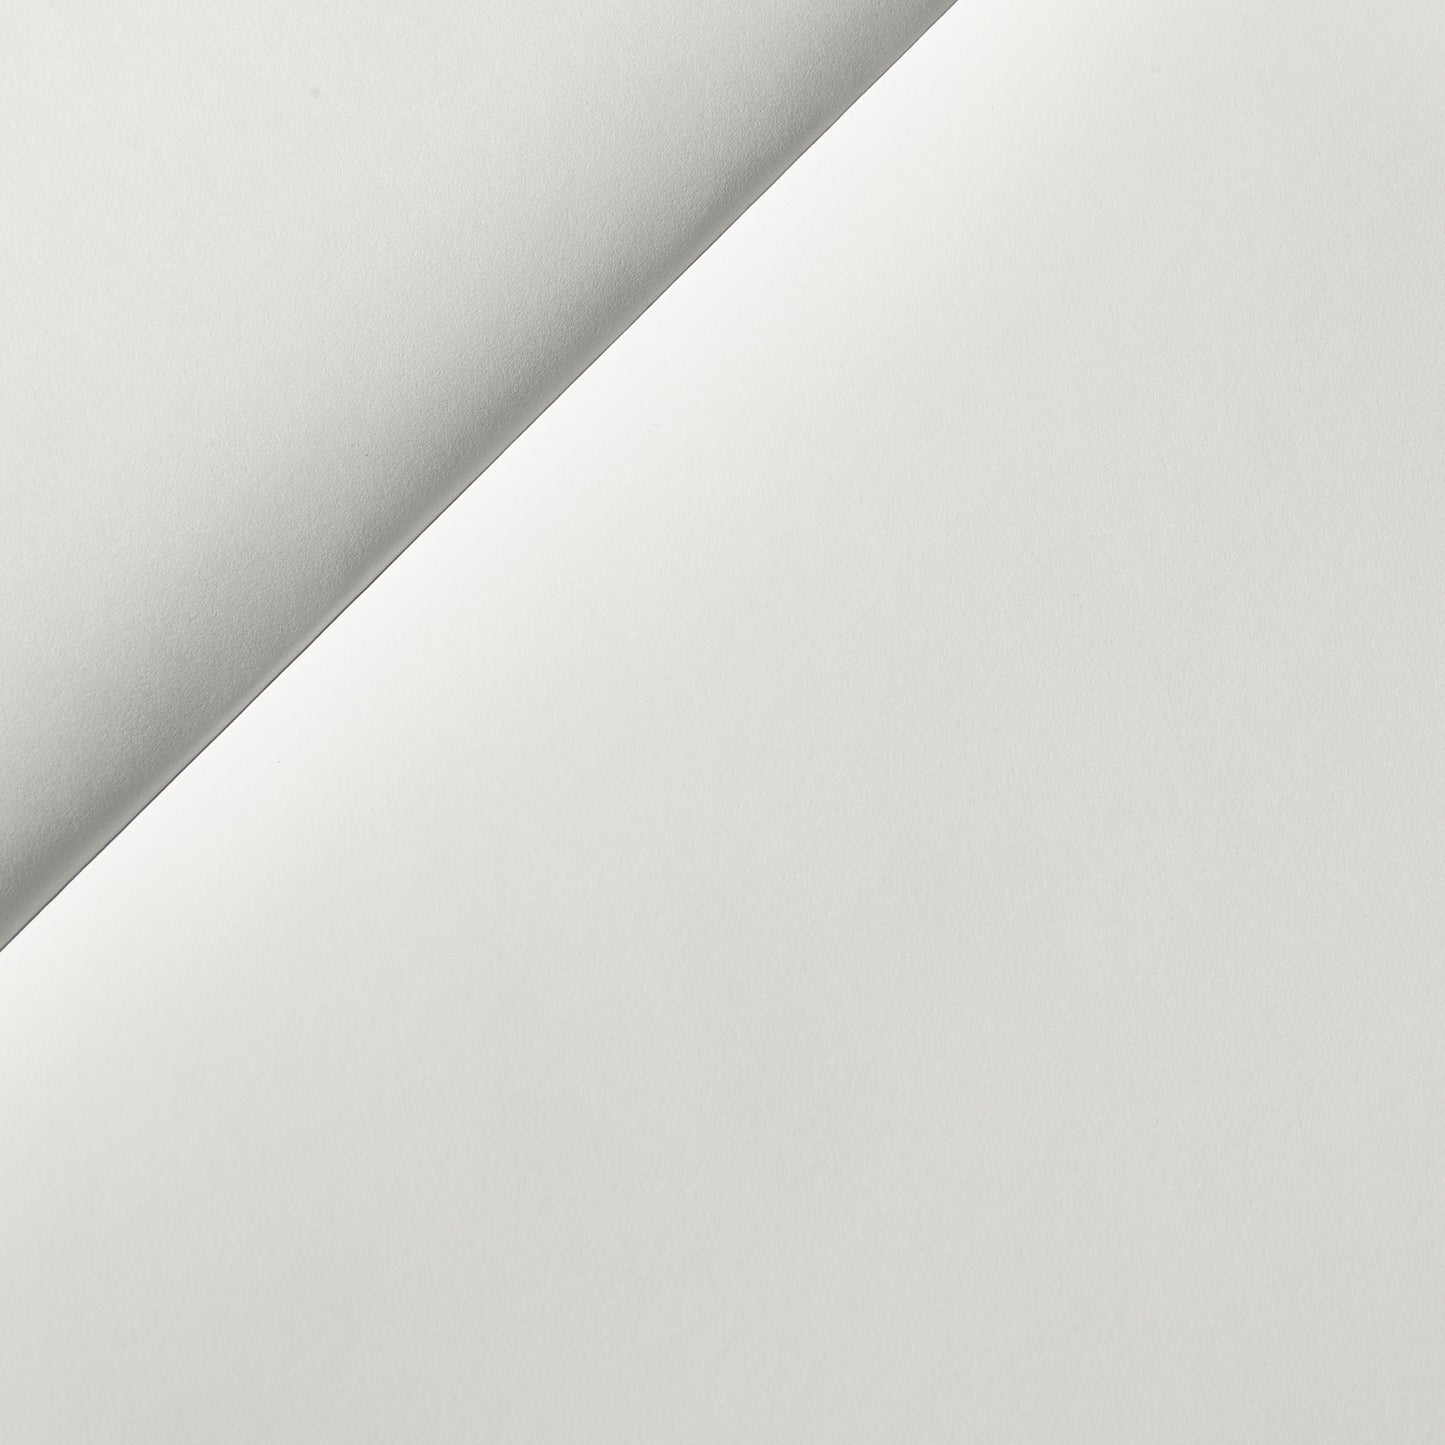 Sample of Daler Rowney's layout paper, with a crisp white surface for sketches, calligraphy and technical drawings. 